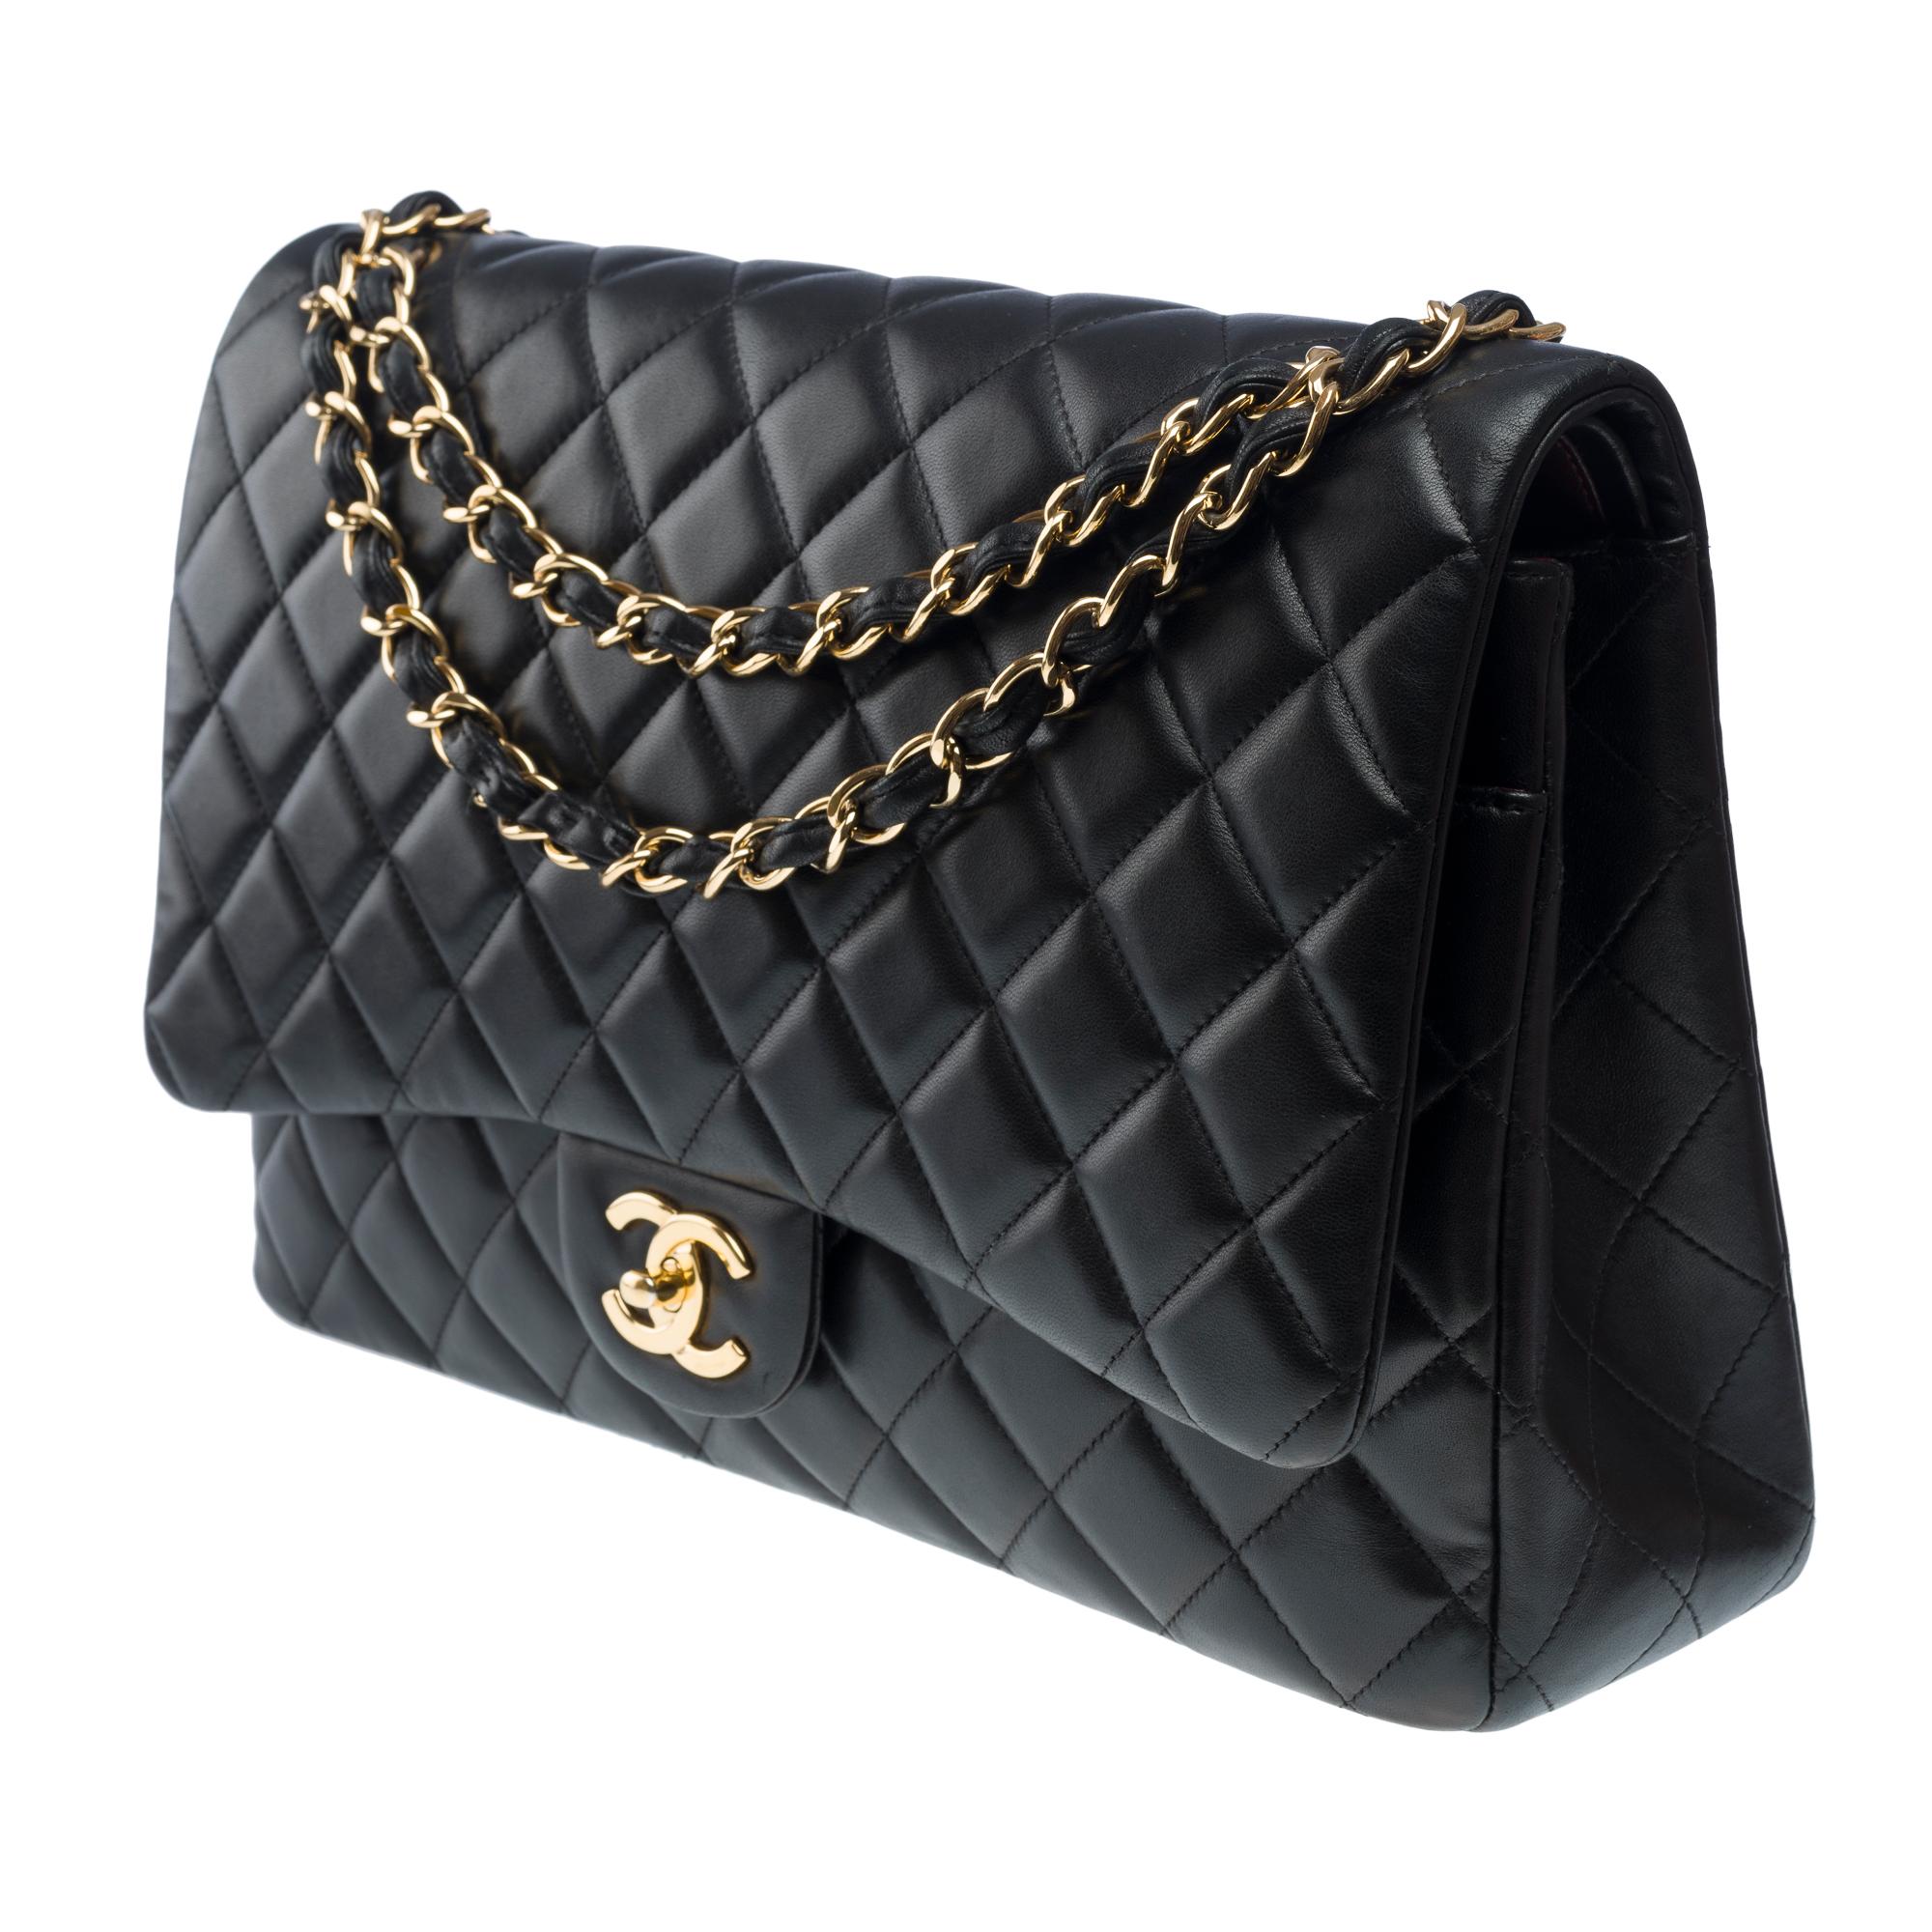 Chanel Timeless Maxi Jumbo double flap shoulder bag in Black quilted lamb, GHW For Sale 1